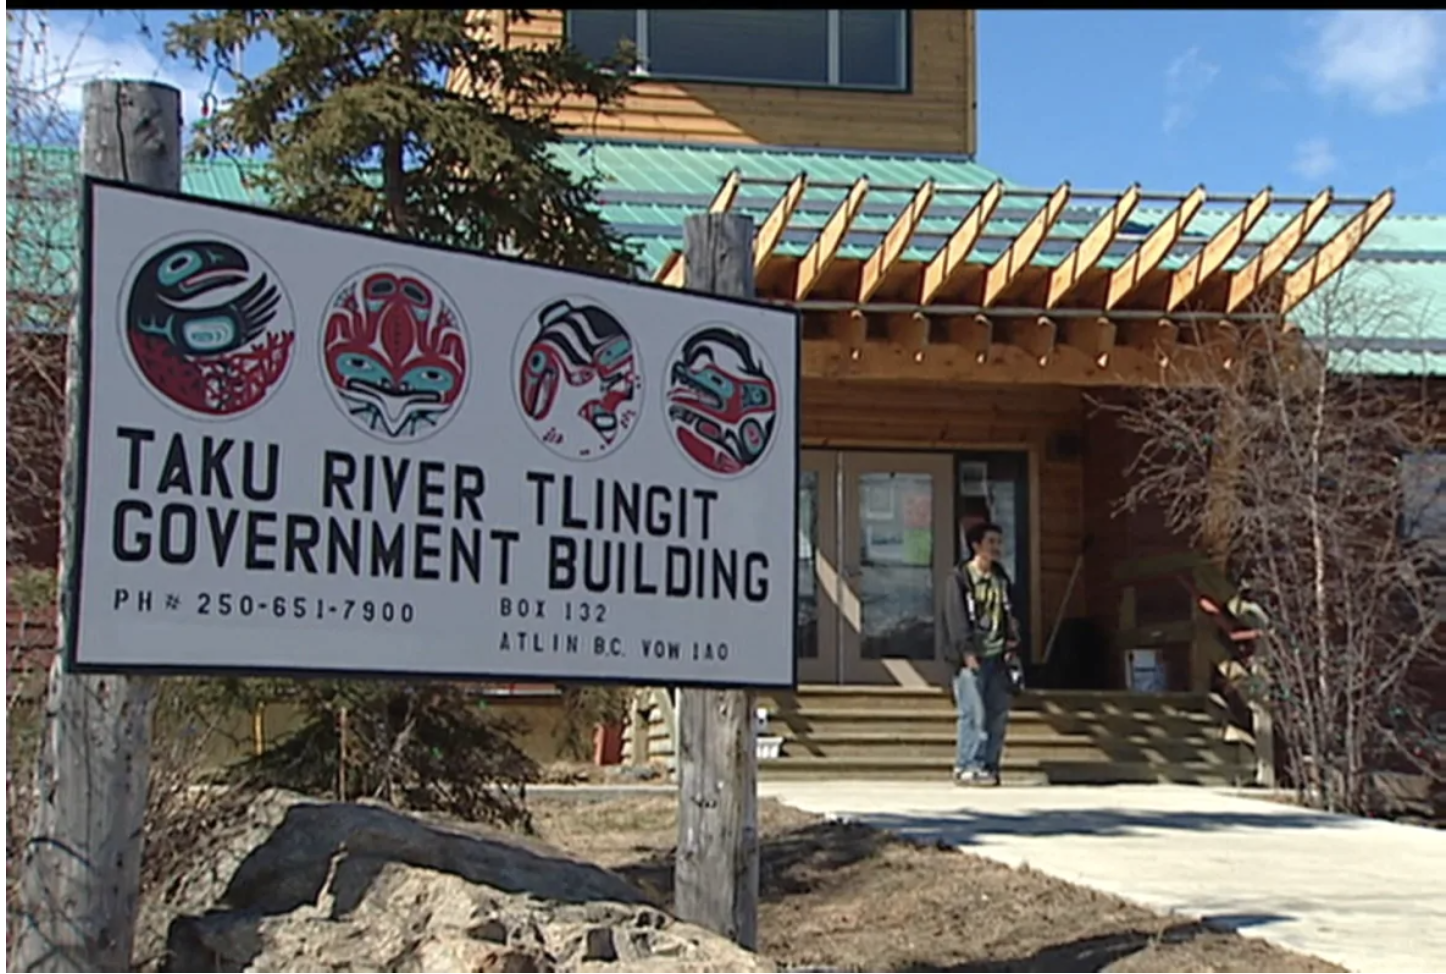 The report sings the praises of the local development arm of the Taku River Tlingit First Nation, which ensured local workers benefited from working alongside hired contractors. (CBC)